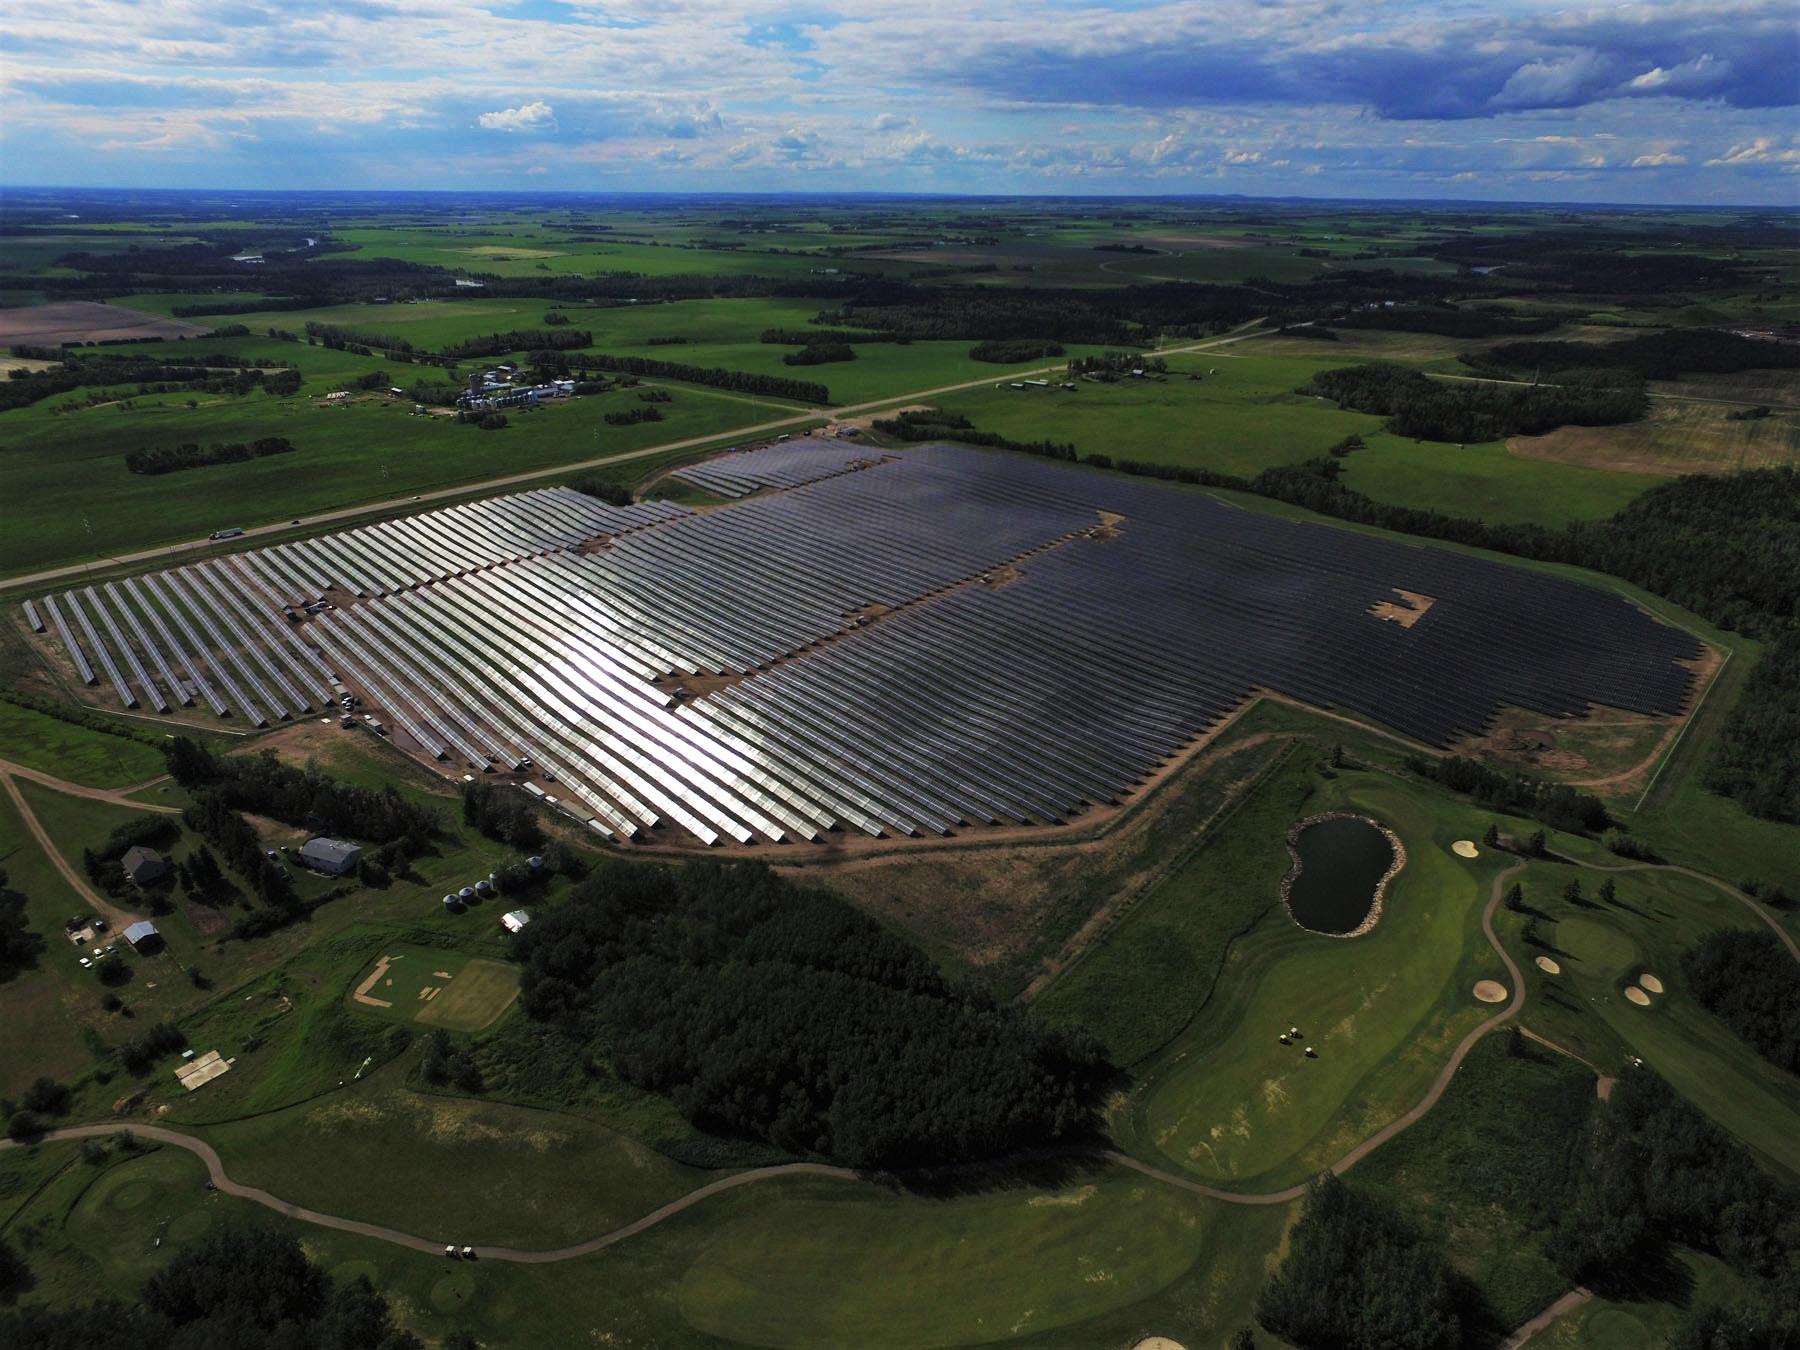 Product Elemental Energy completes Acquisition and Development of, and Starts Construction on, the Innisfail Solar Project. image